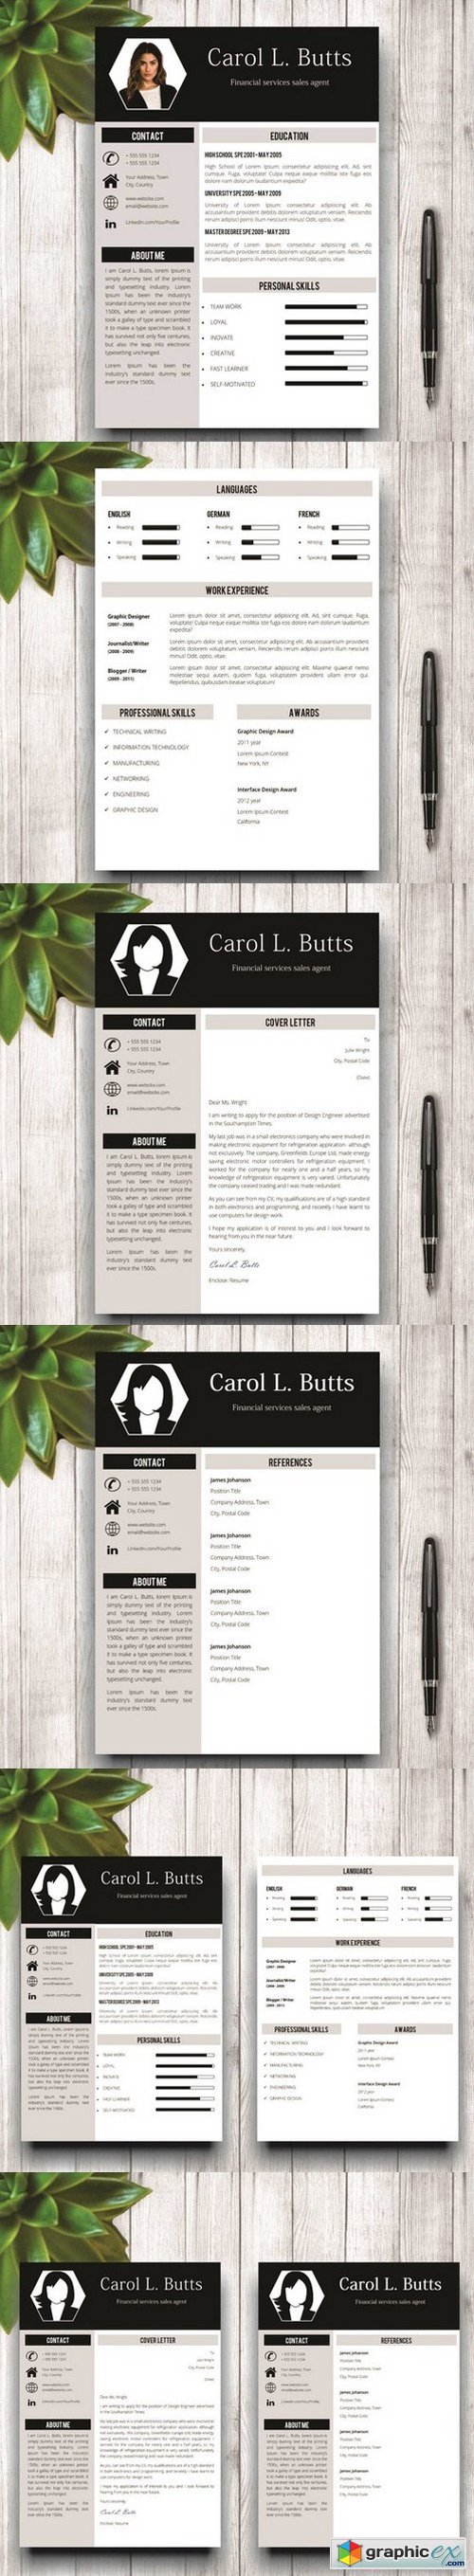 Clean Resume Template With Photo